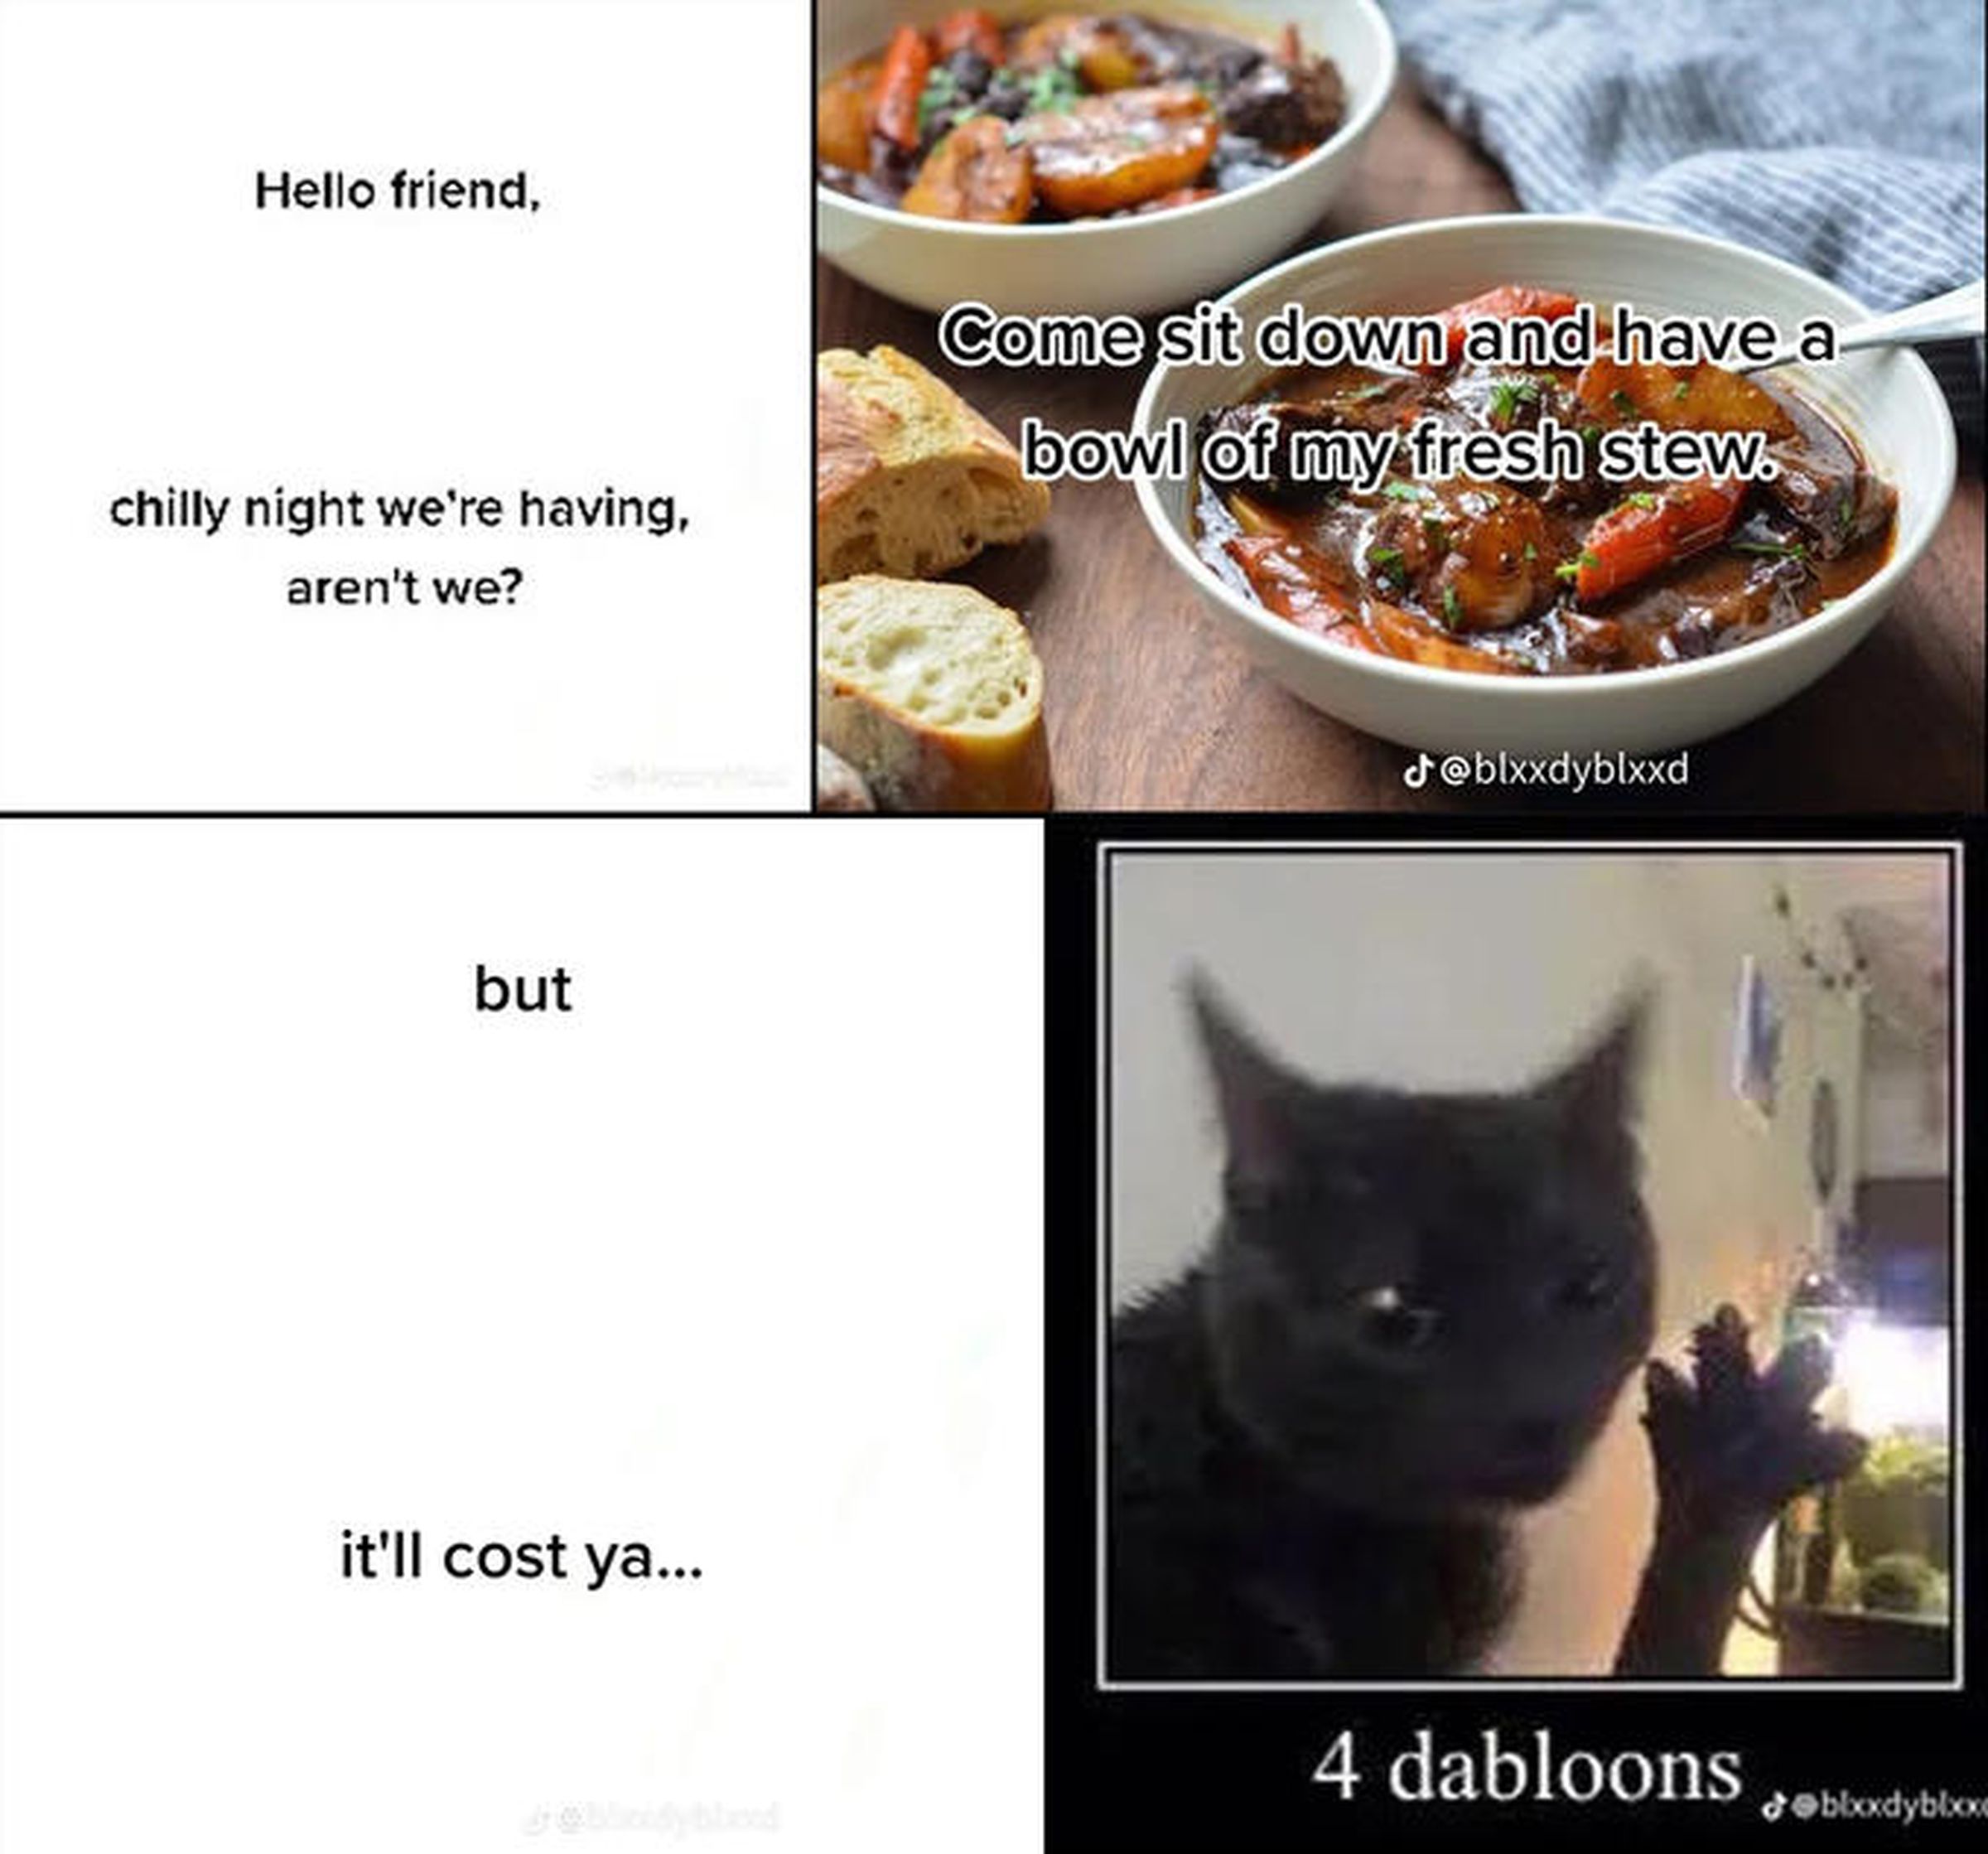 A four-panel meme in which a cat offers the user some stew in exchange for ‘dabloons’